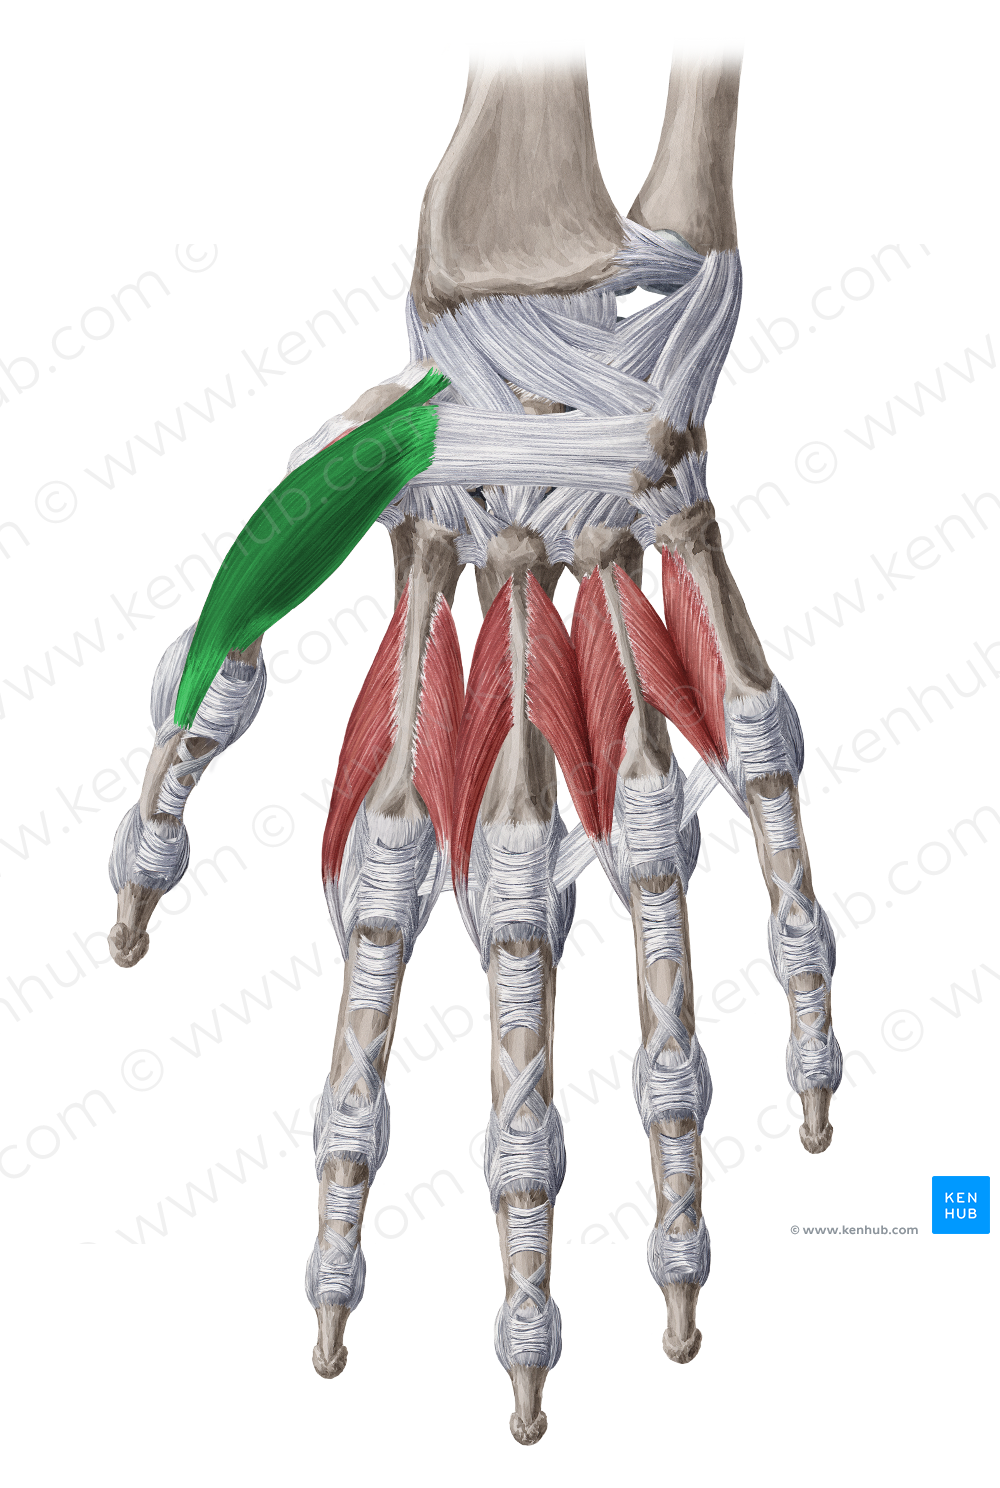 Abductor pollicis brevis muscle (#5172)